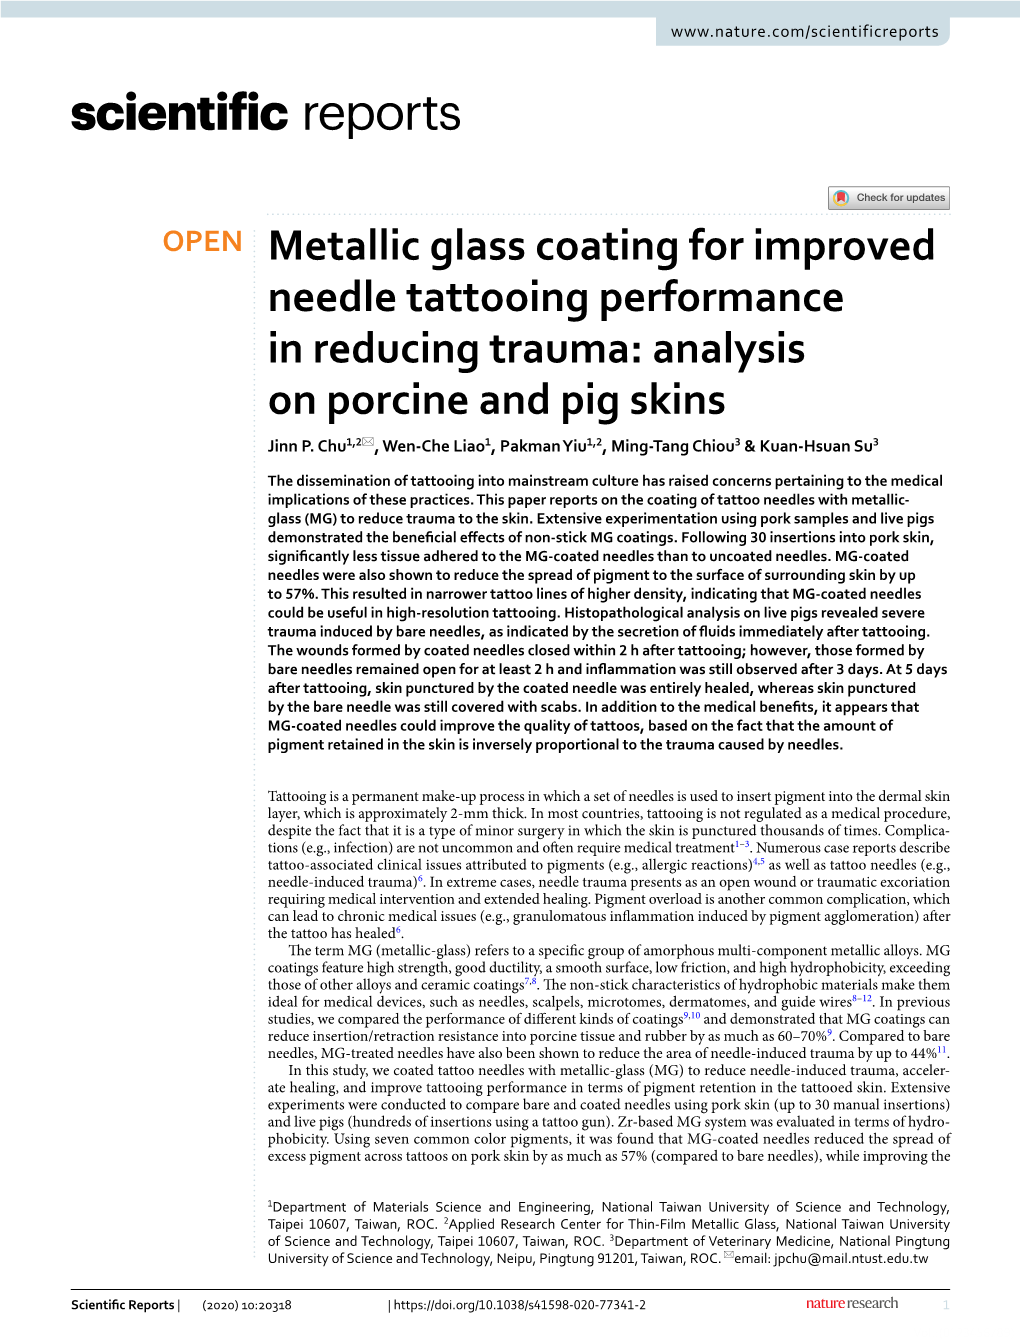 Metallic Glass Coating for Improved Needle Tattooing Performance in Reducing Trauma: Analysis on Porcine and Pig Skins Jinn P